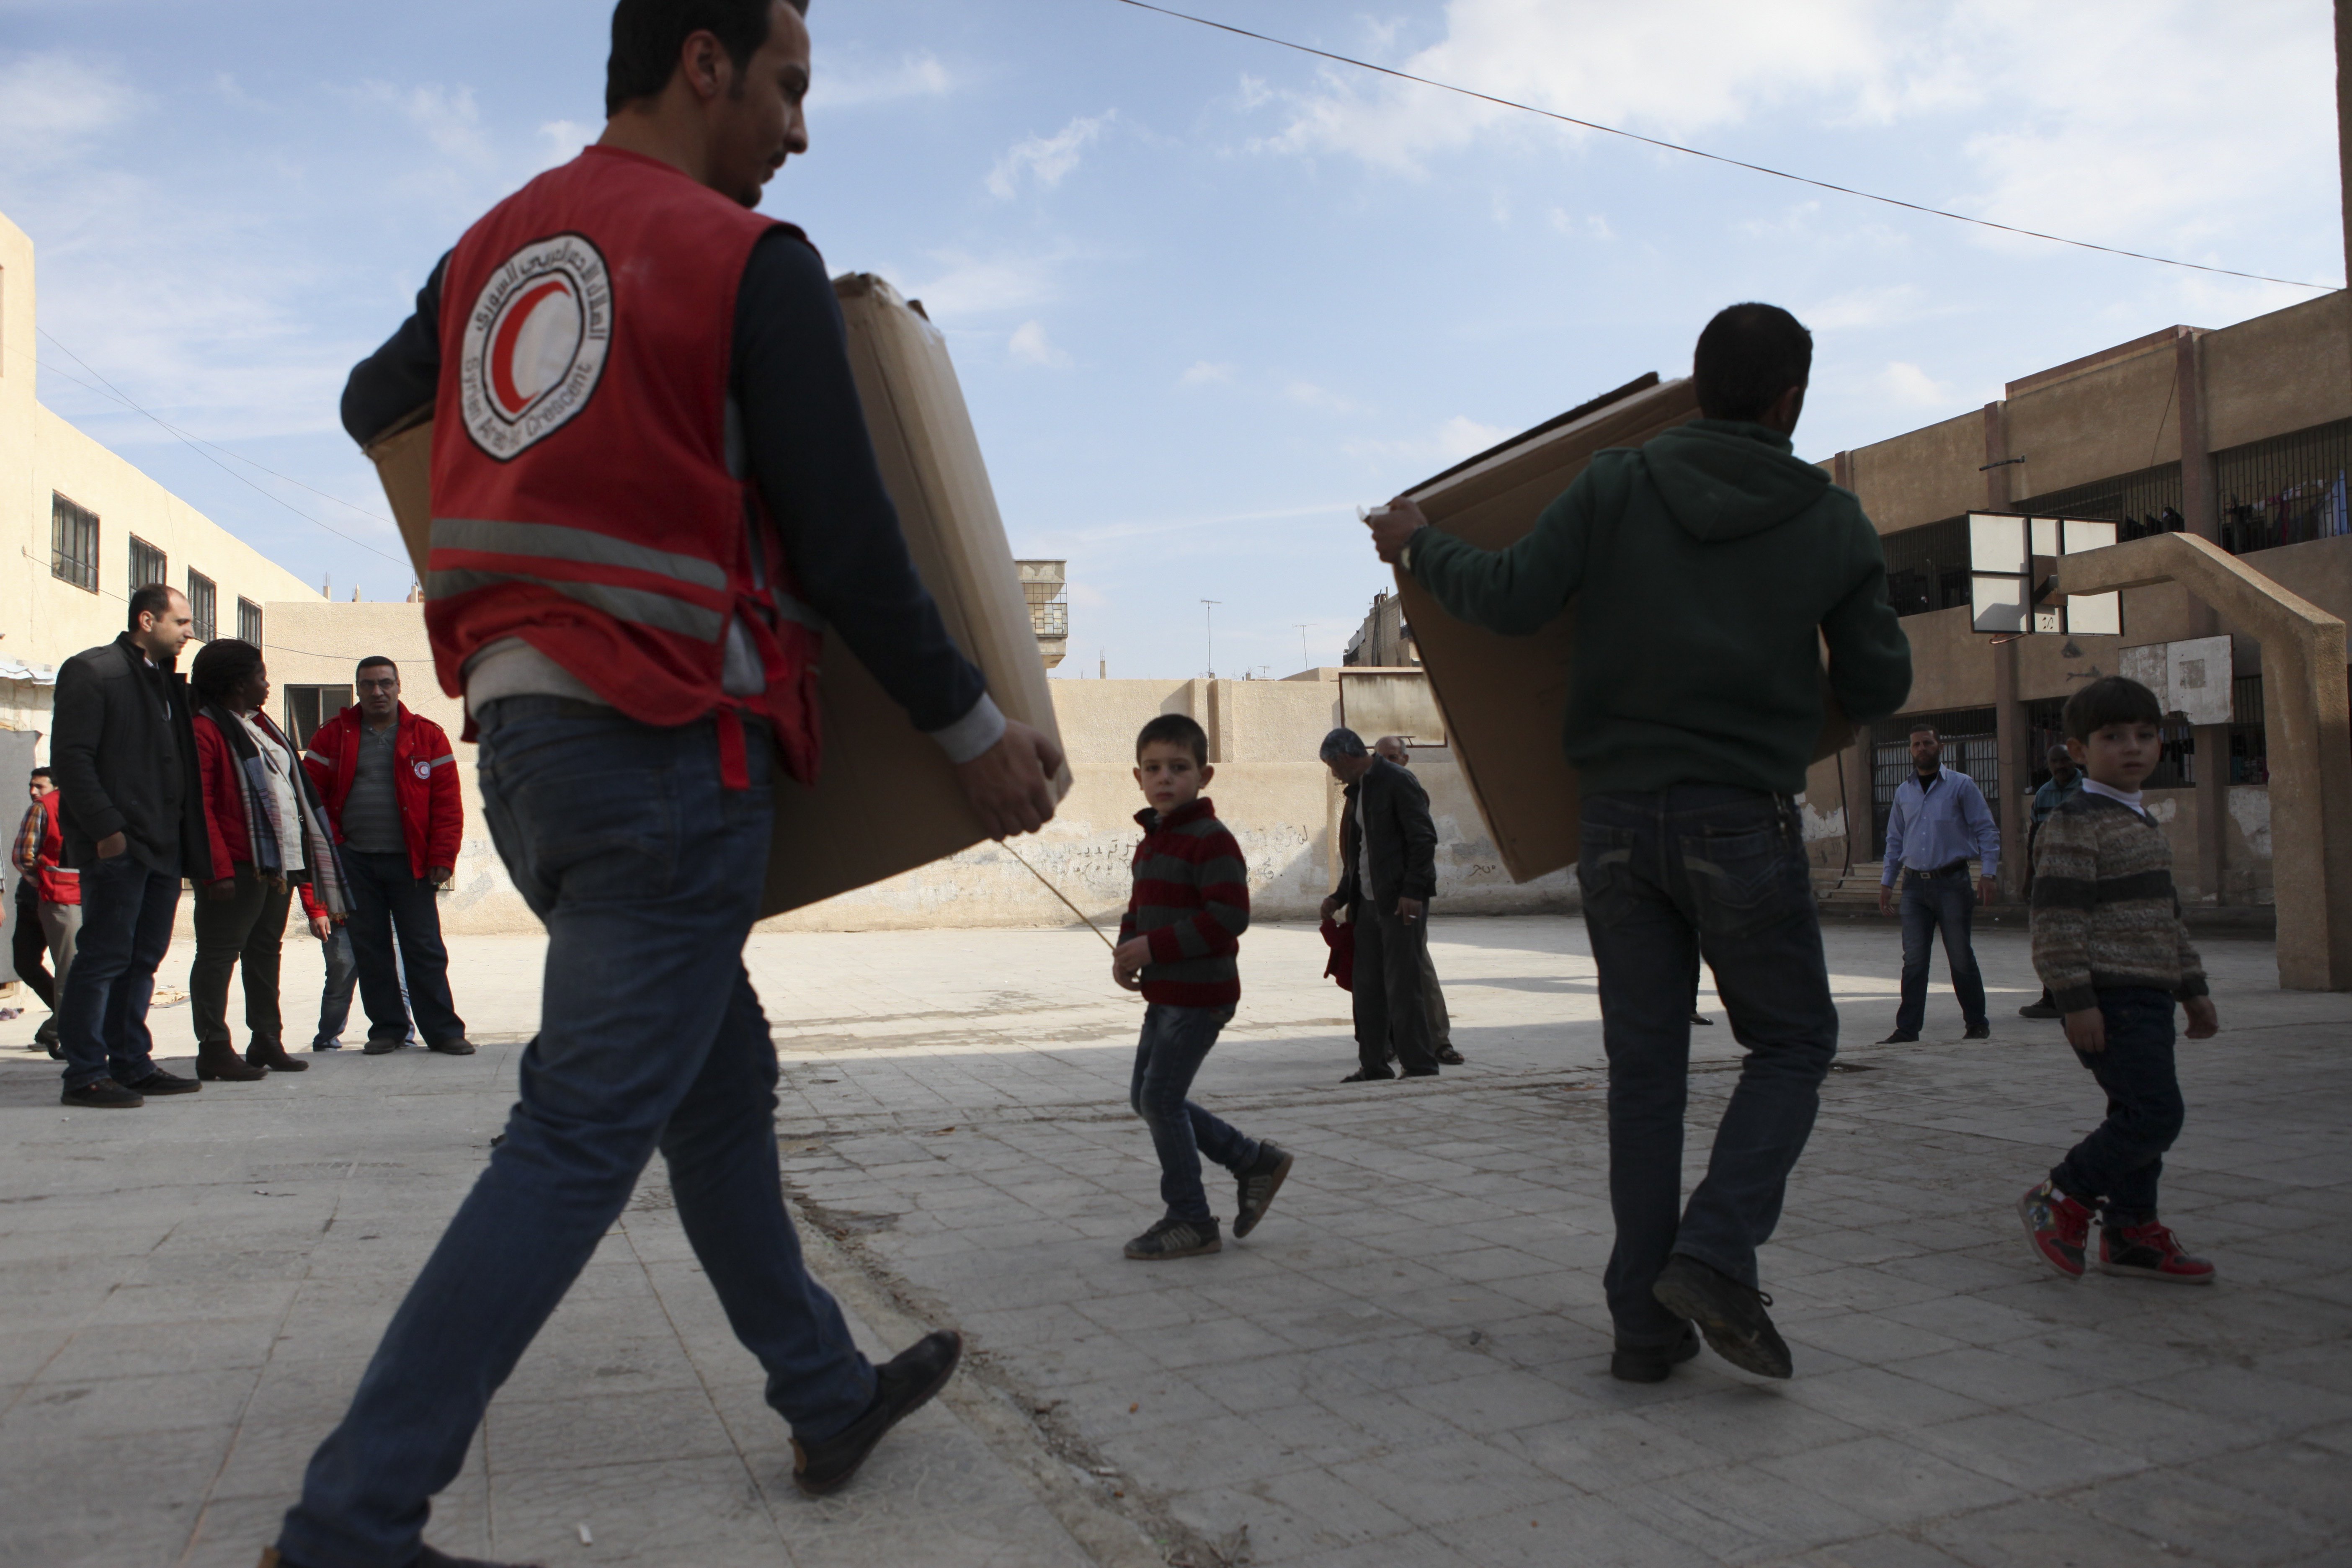 Syrian Arab Red Crescent volunteers move boxes with winter clothes for children to a schoolyard where approximately 30 displaced families live. Photo: KRZYSIEK, Pawel/ICRC